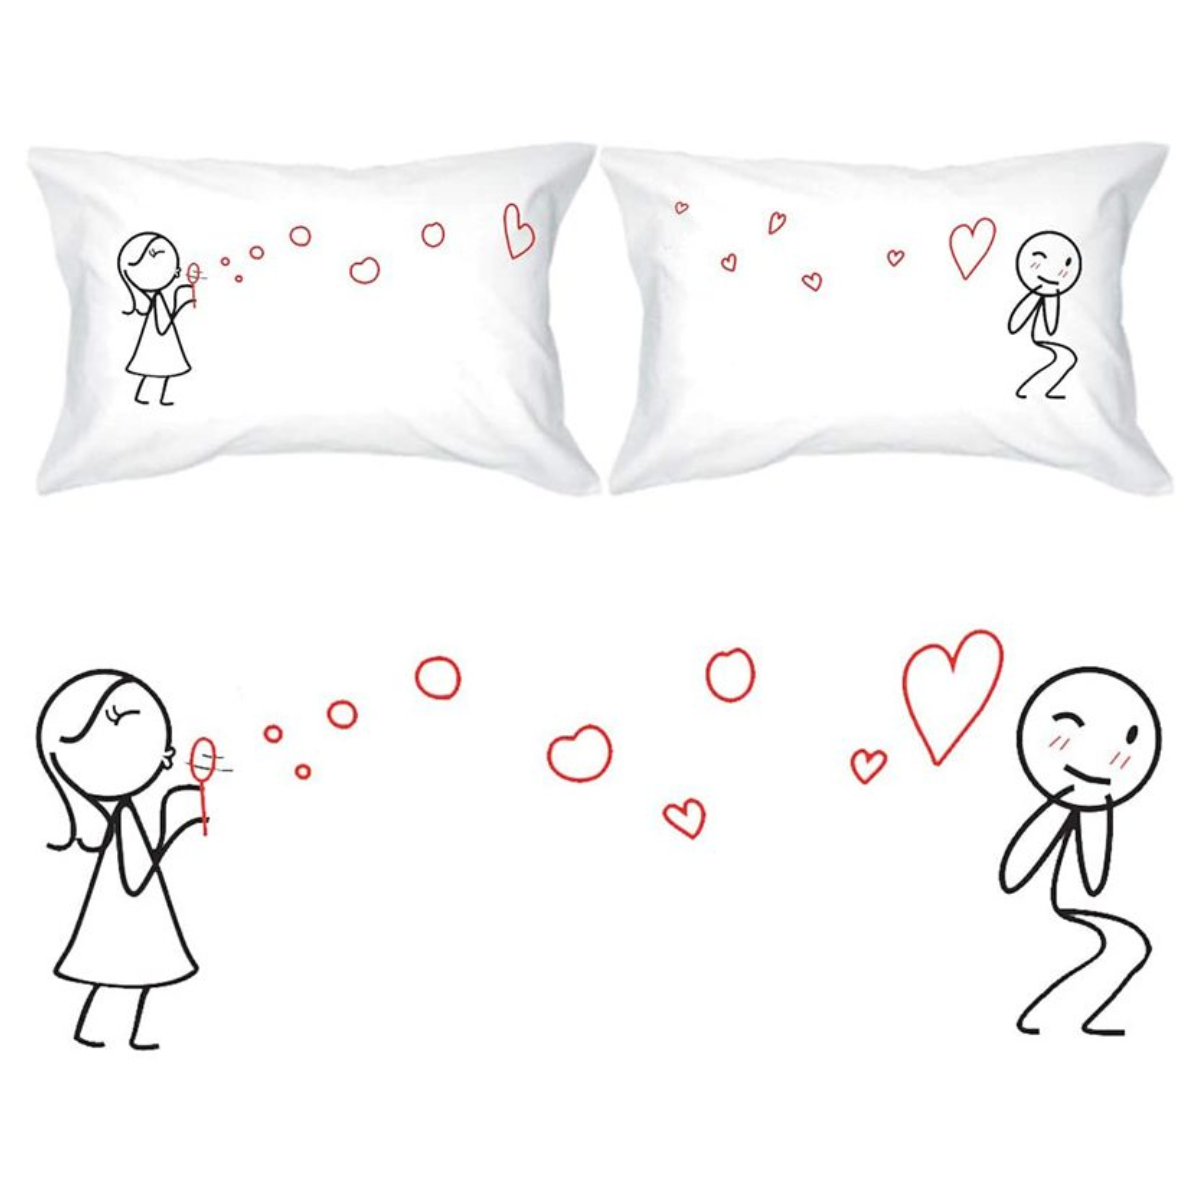 13. Stay Close Even When Miles Apart: Long-Distance Relationship Pillow - The Perfect Anniversary Gift